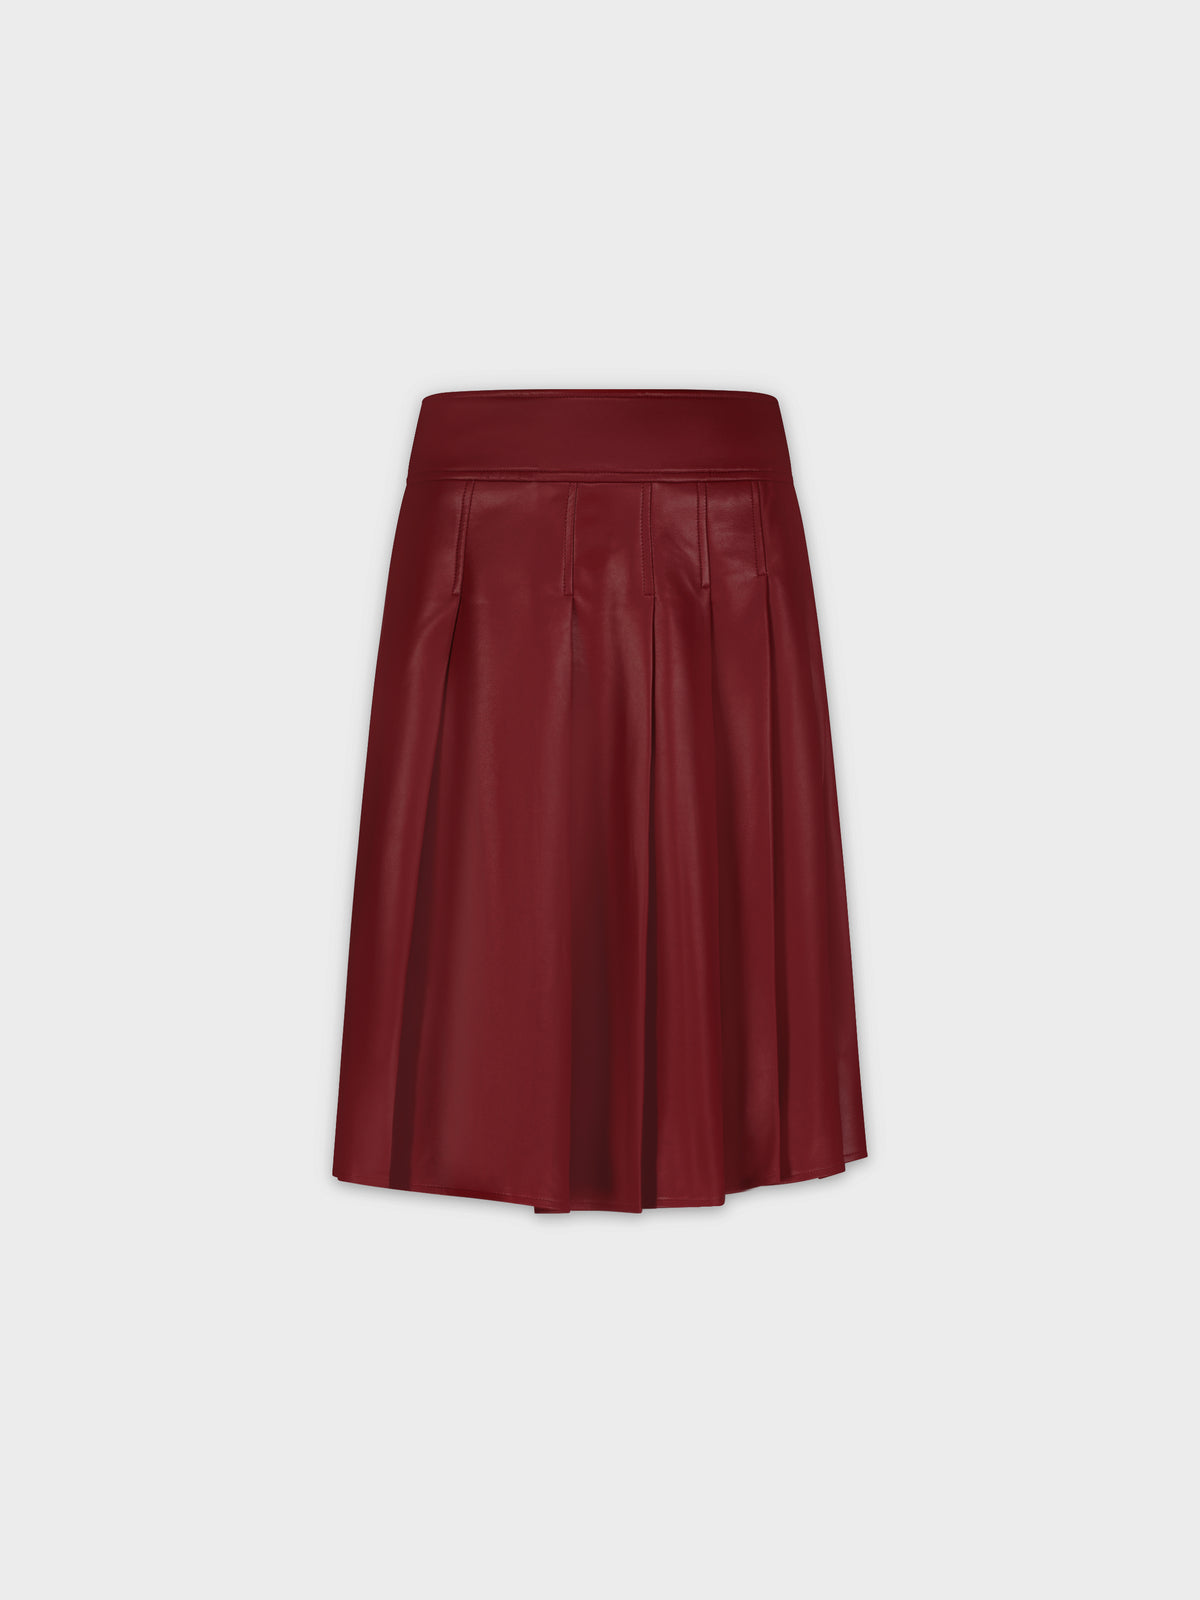 Stitched Pleated Leather Skirt-Burgundy